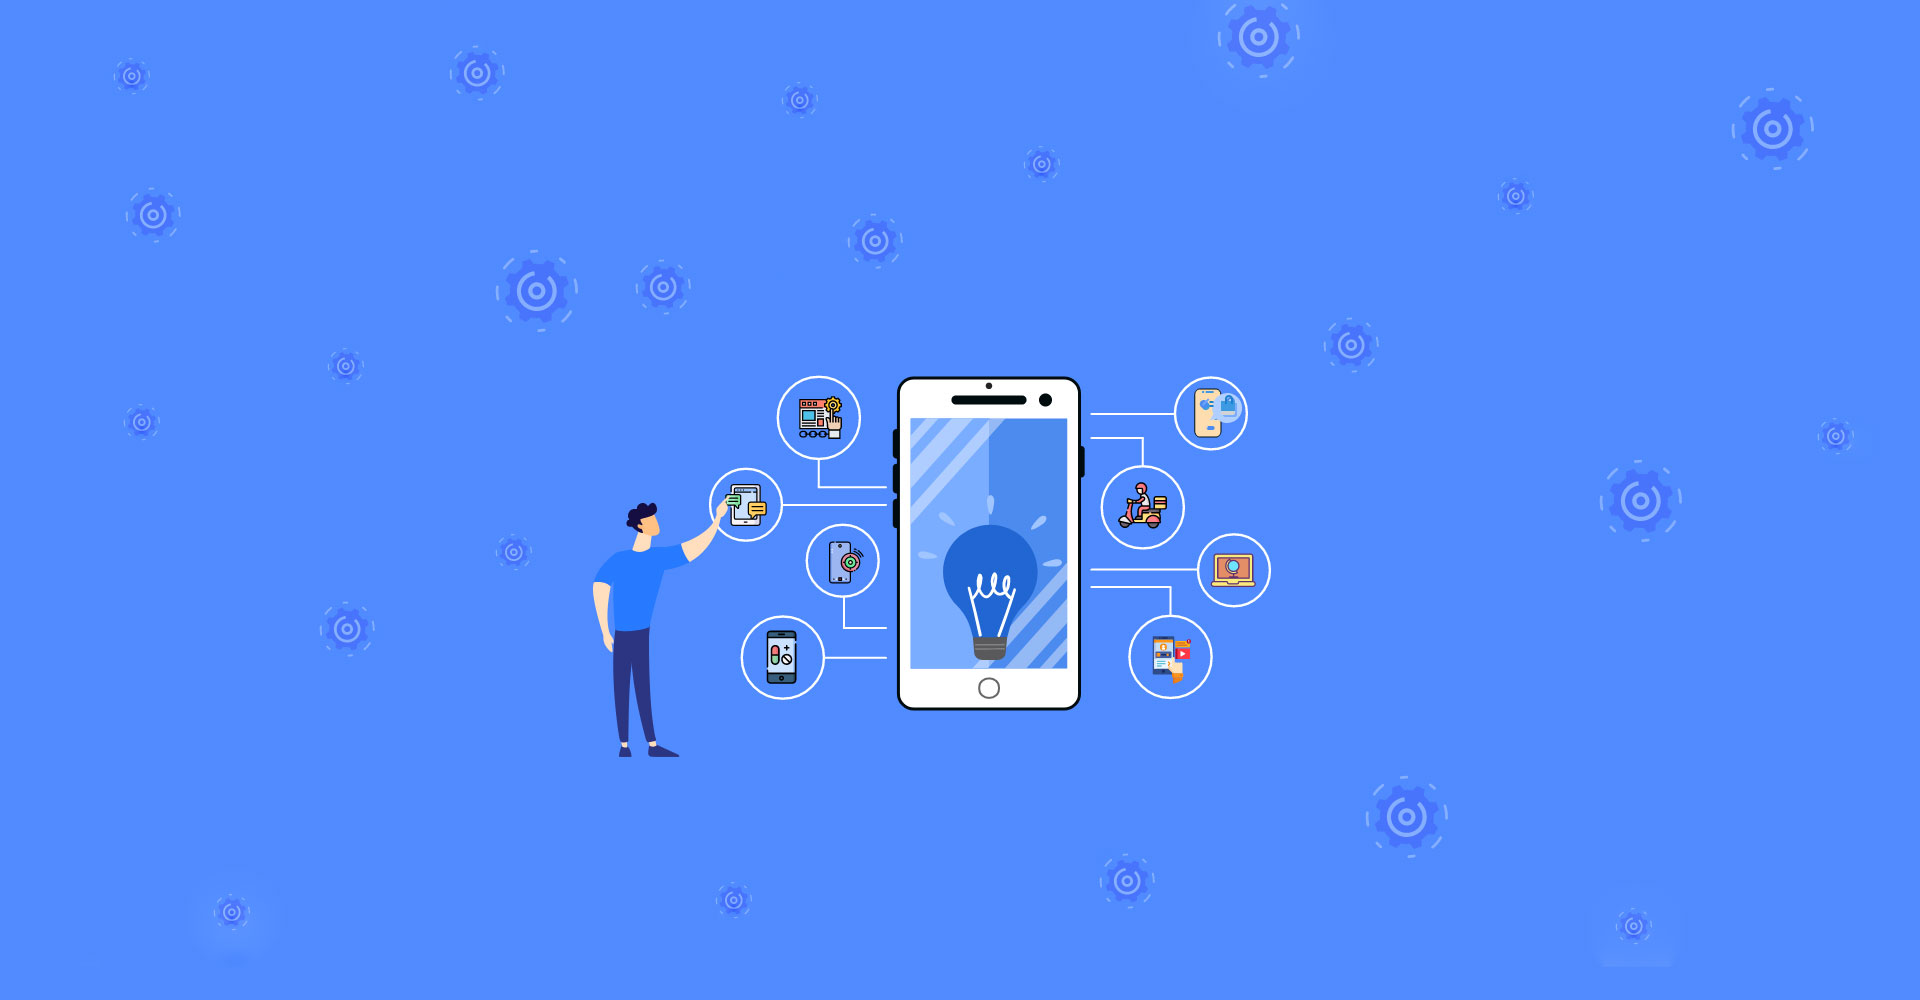 20 Unique Mobile App Ideas for Startups to Launch in 2023